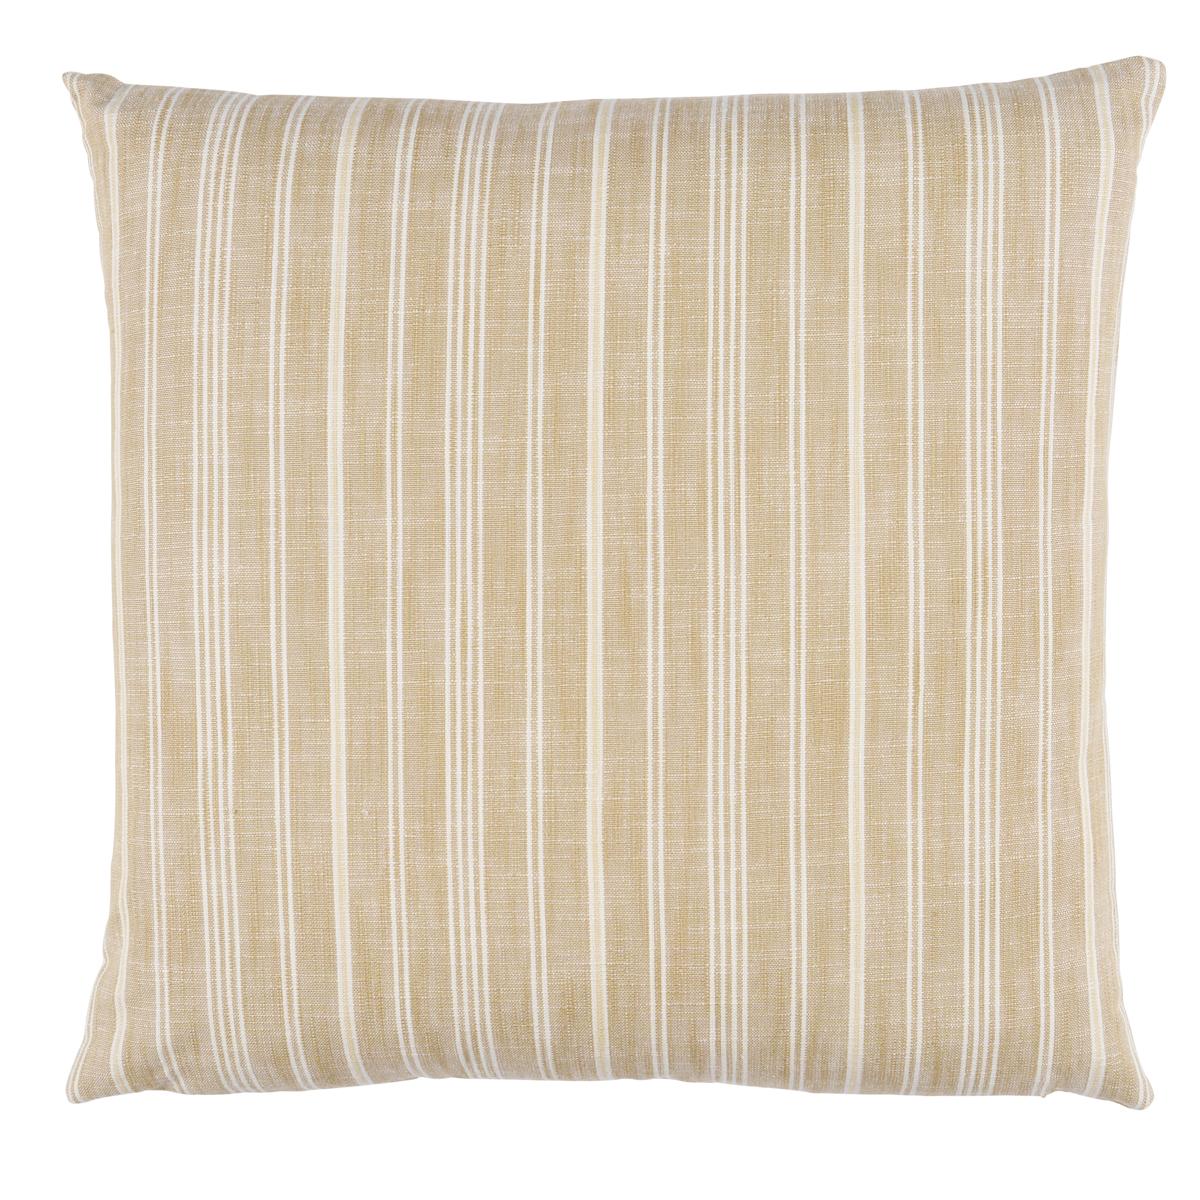 Lucy Stripe Pillow in Neutral 18 x 18"